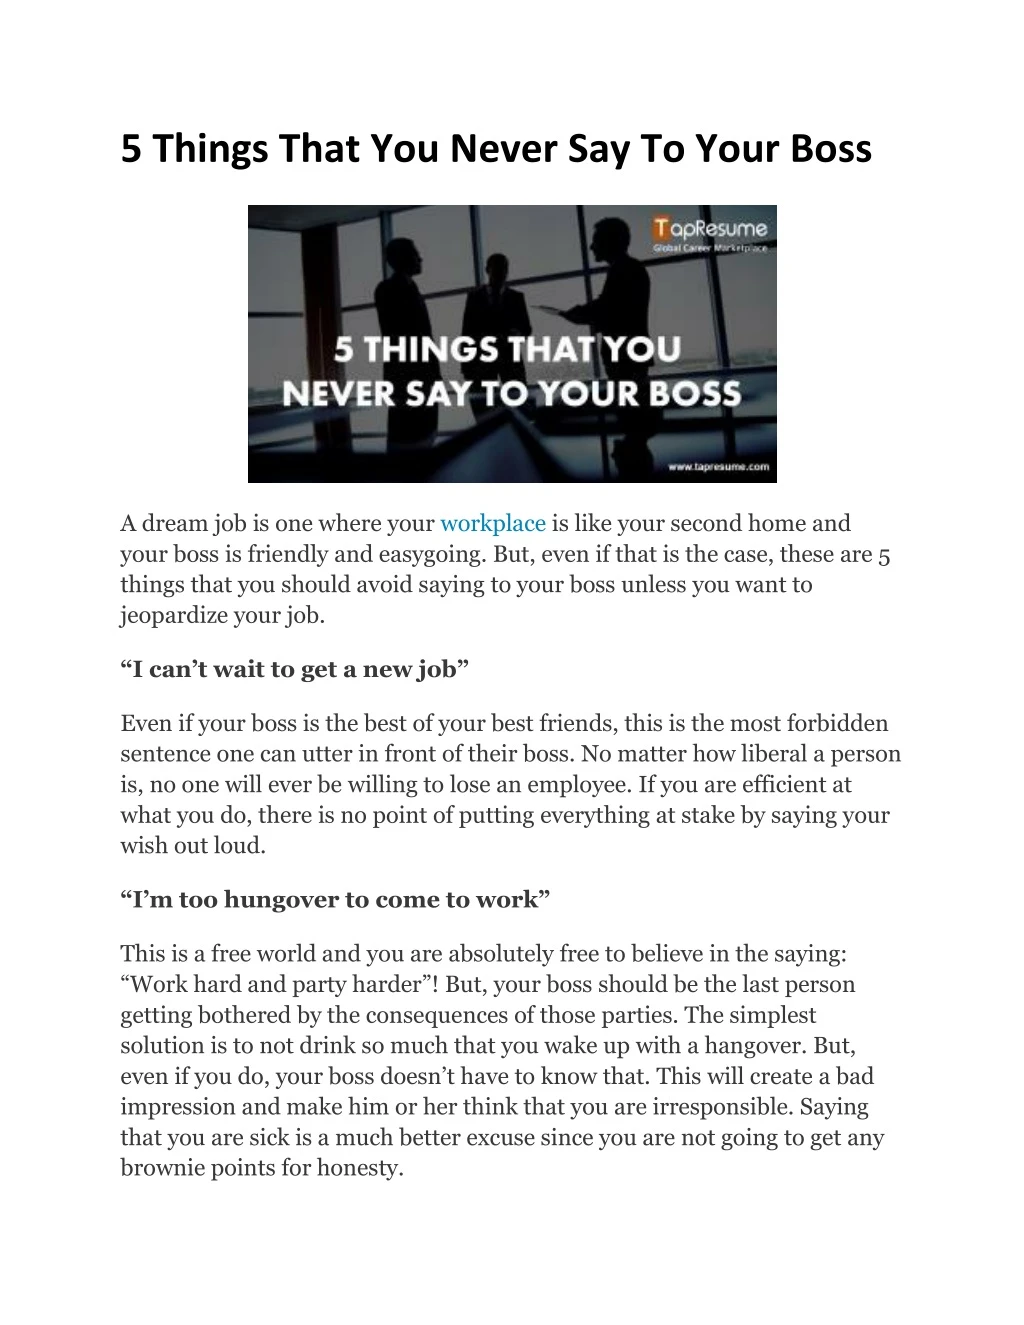 5 things that you never say to your boss